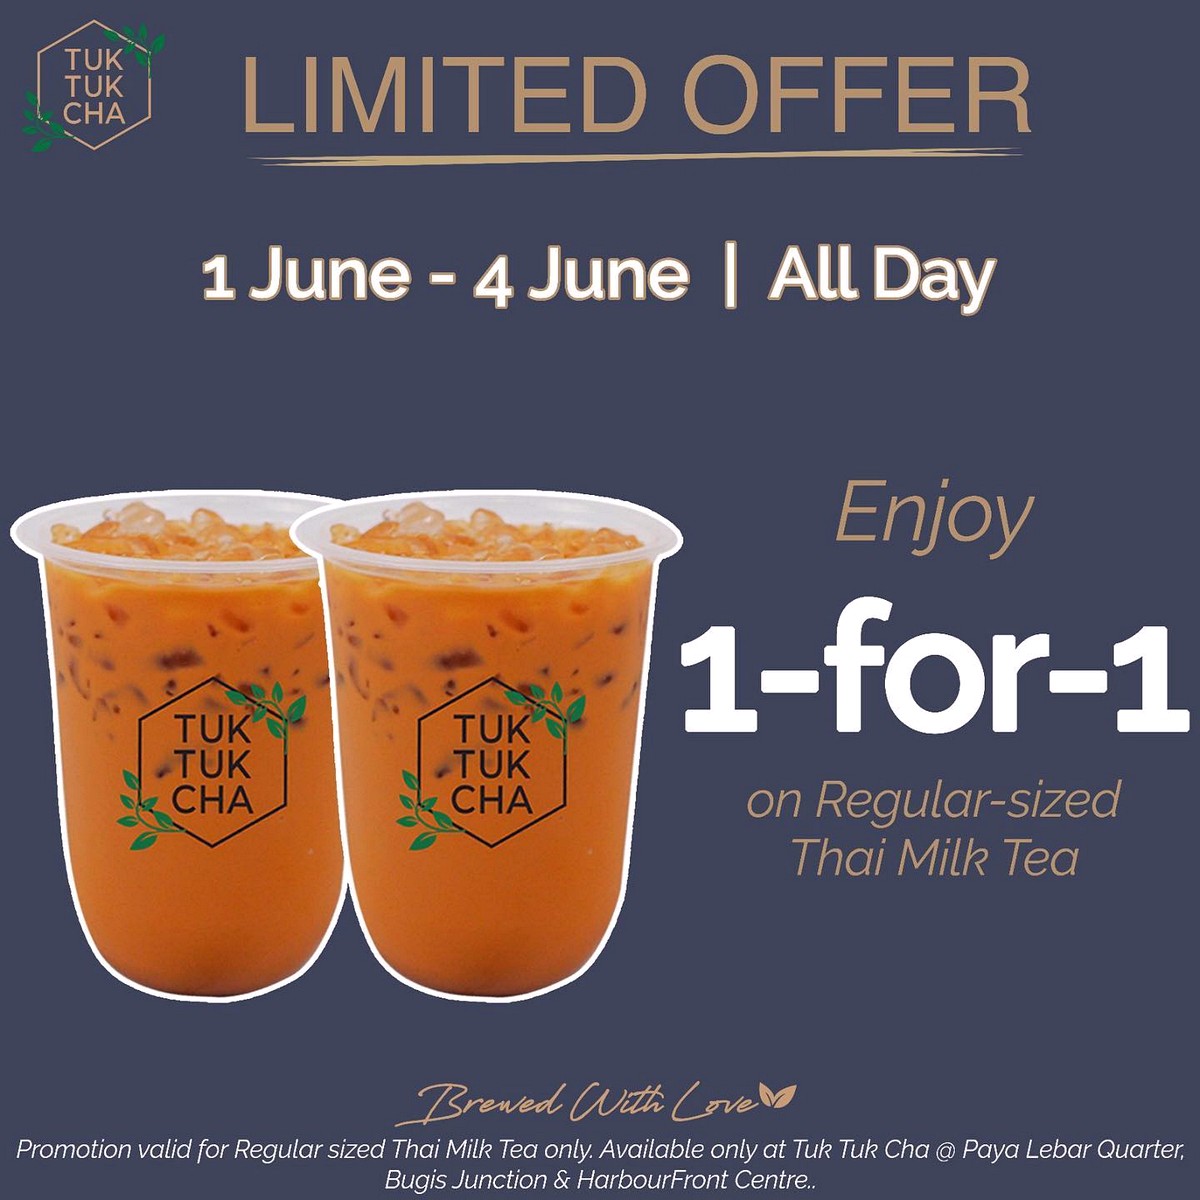 Tuk-Tuk-Cha-Limited-Offers-1-for-1-Promo-Singapore-2021-Beverages-Offers-Warehouse-Sale-Clearance Now till 4 Jun 2021: Tuk Tuk Cha 1-FOR-1 Thai Milk Tea Promo All-Day at 3 selected outlets in Singapore